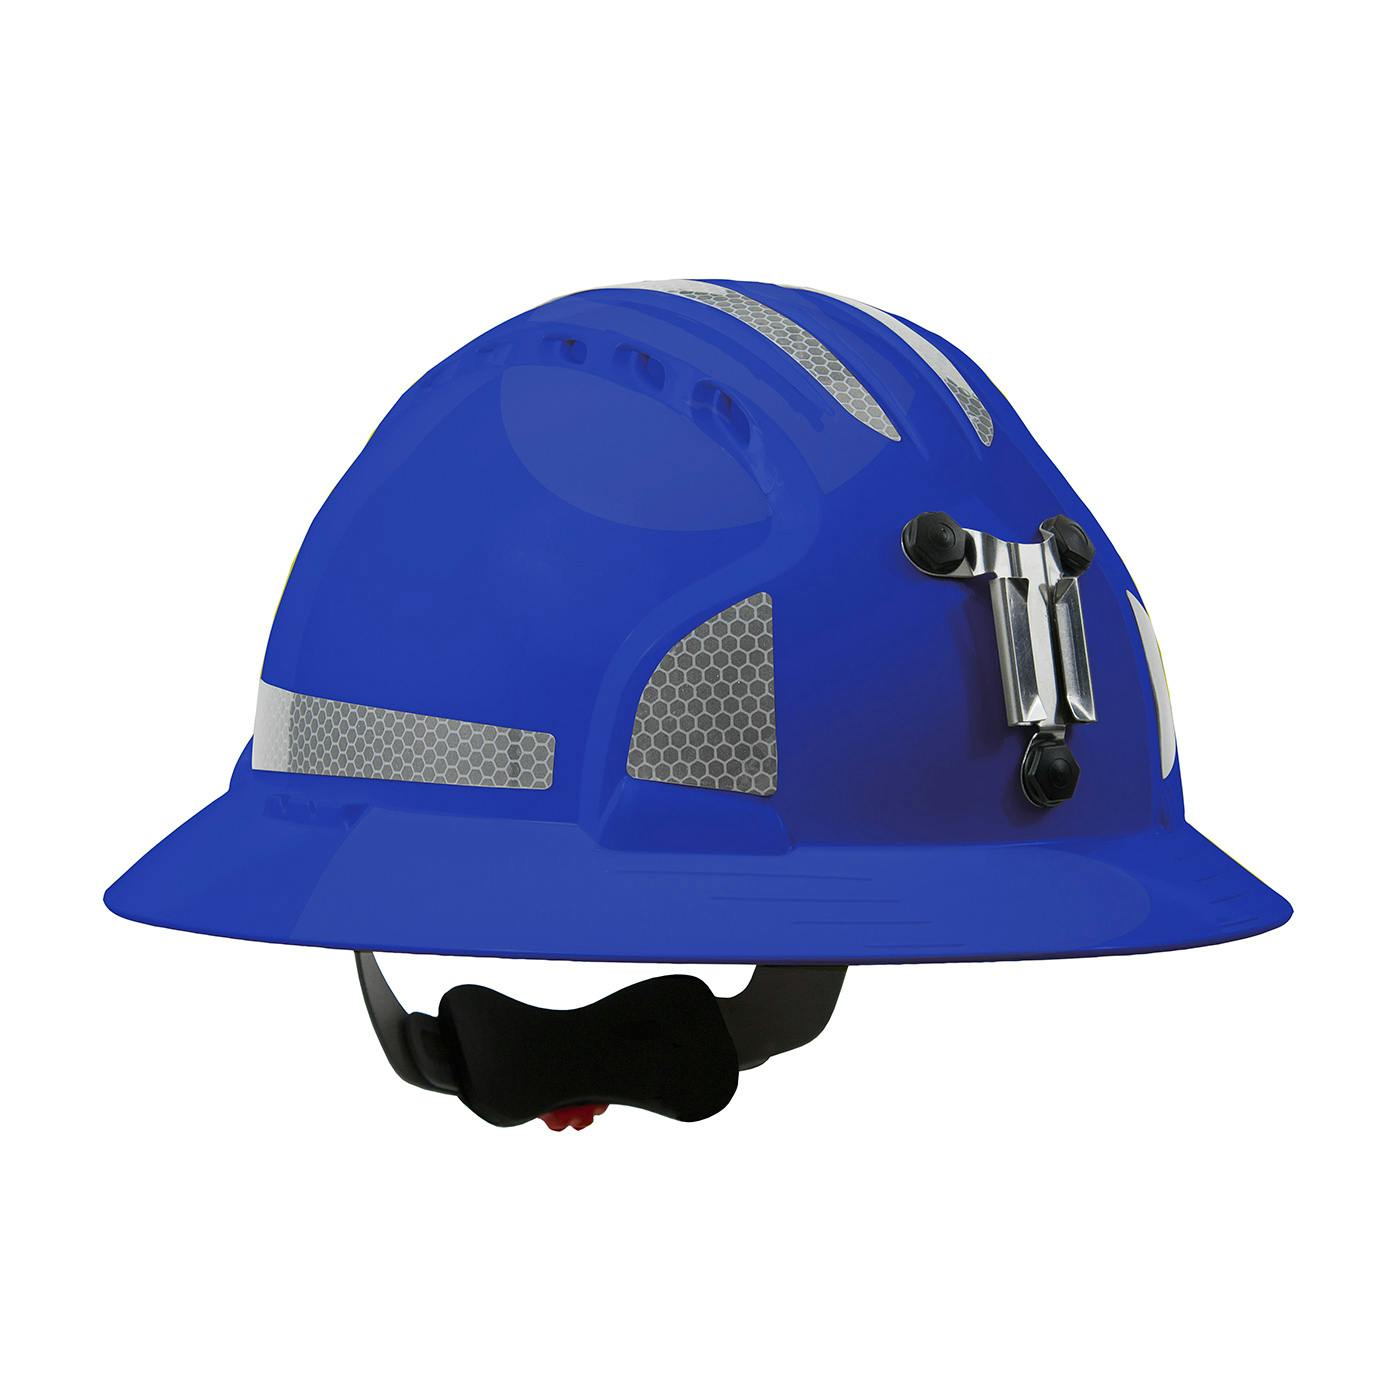 Evolution® Deluxe 6161 Full Brim Mining Hard Hat with HDPE Shell, 6-Point Polyester Suspension, Wheel Ratchet Adjustment and CR2 Reflective Kit (280-EV6161MCR2)